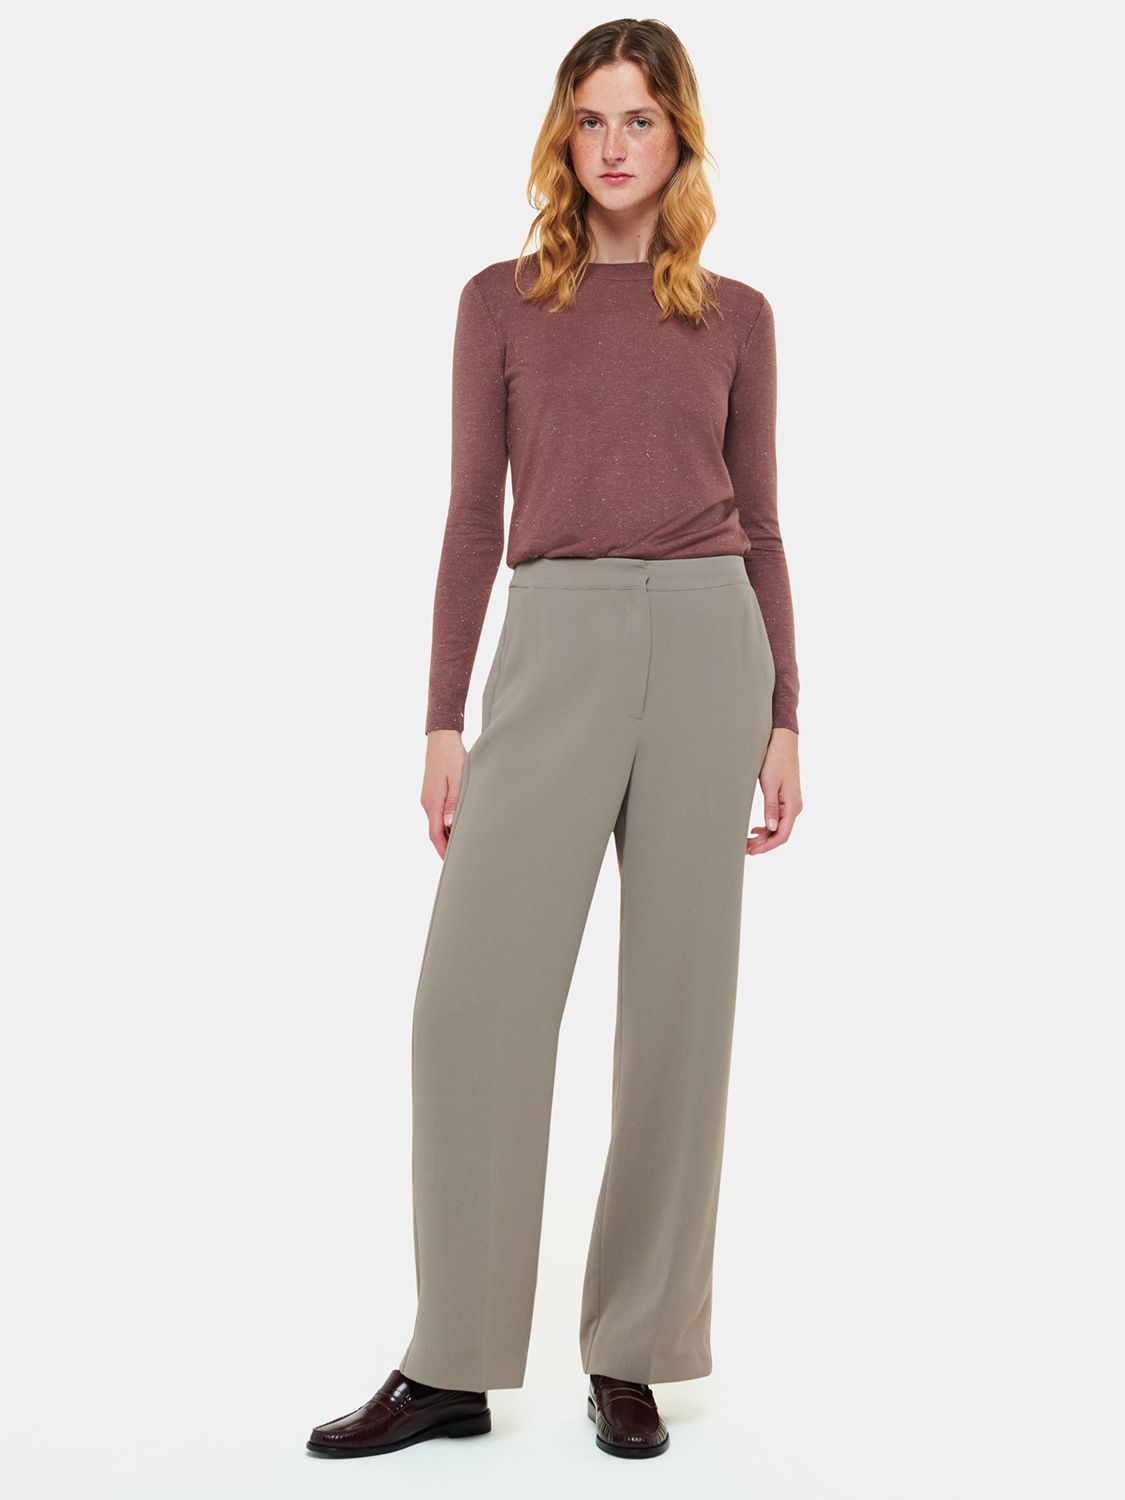 Whistles Annie Sparkle Fine Knit Jumper, Brown at John Lewis & Partners